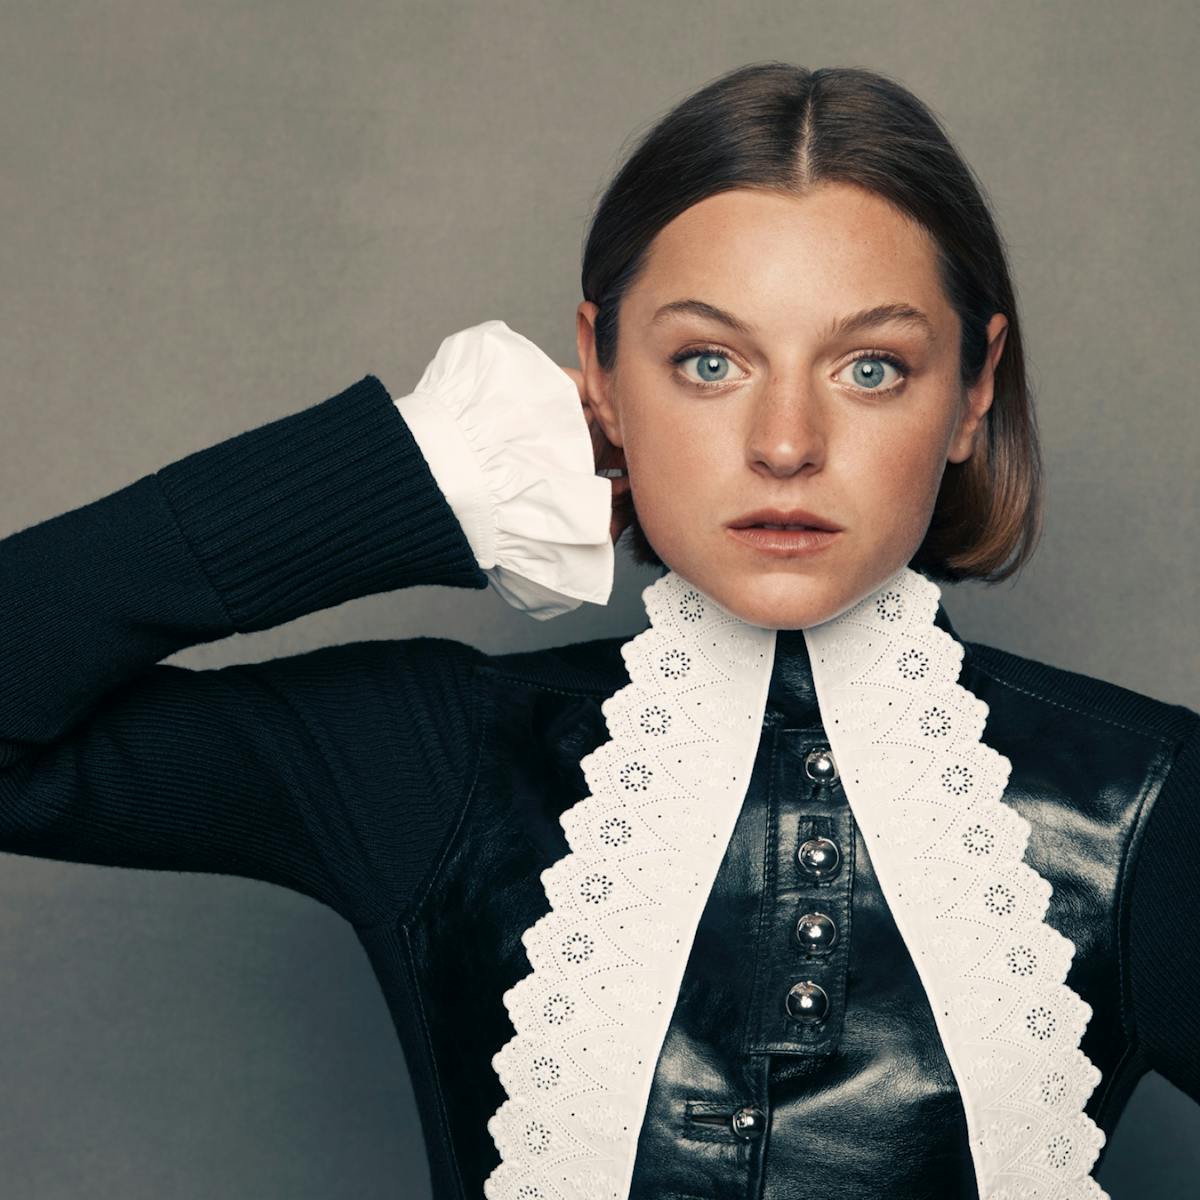 A portrait of Emma Corrin set against a slate-gray background. She wears a striking black leather and lace outfit with long sleeves and a high neckline. She has short cropped brown hair and her blue eyes pierce through the shot.